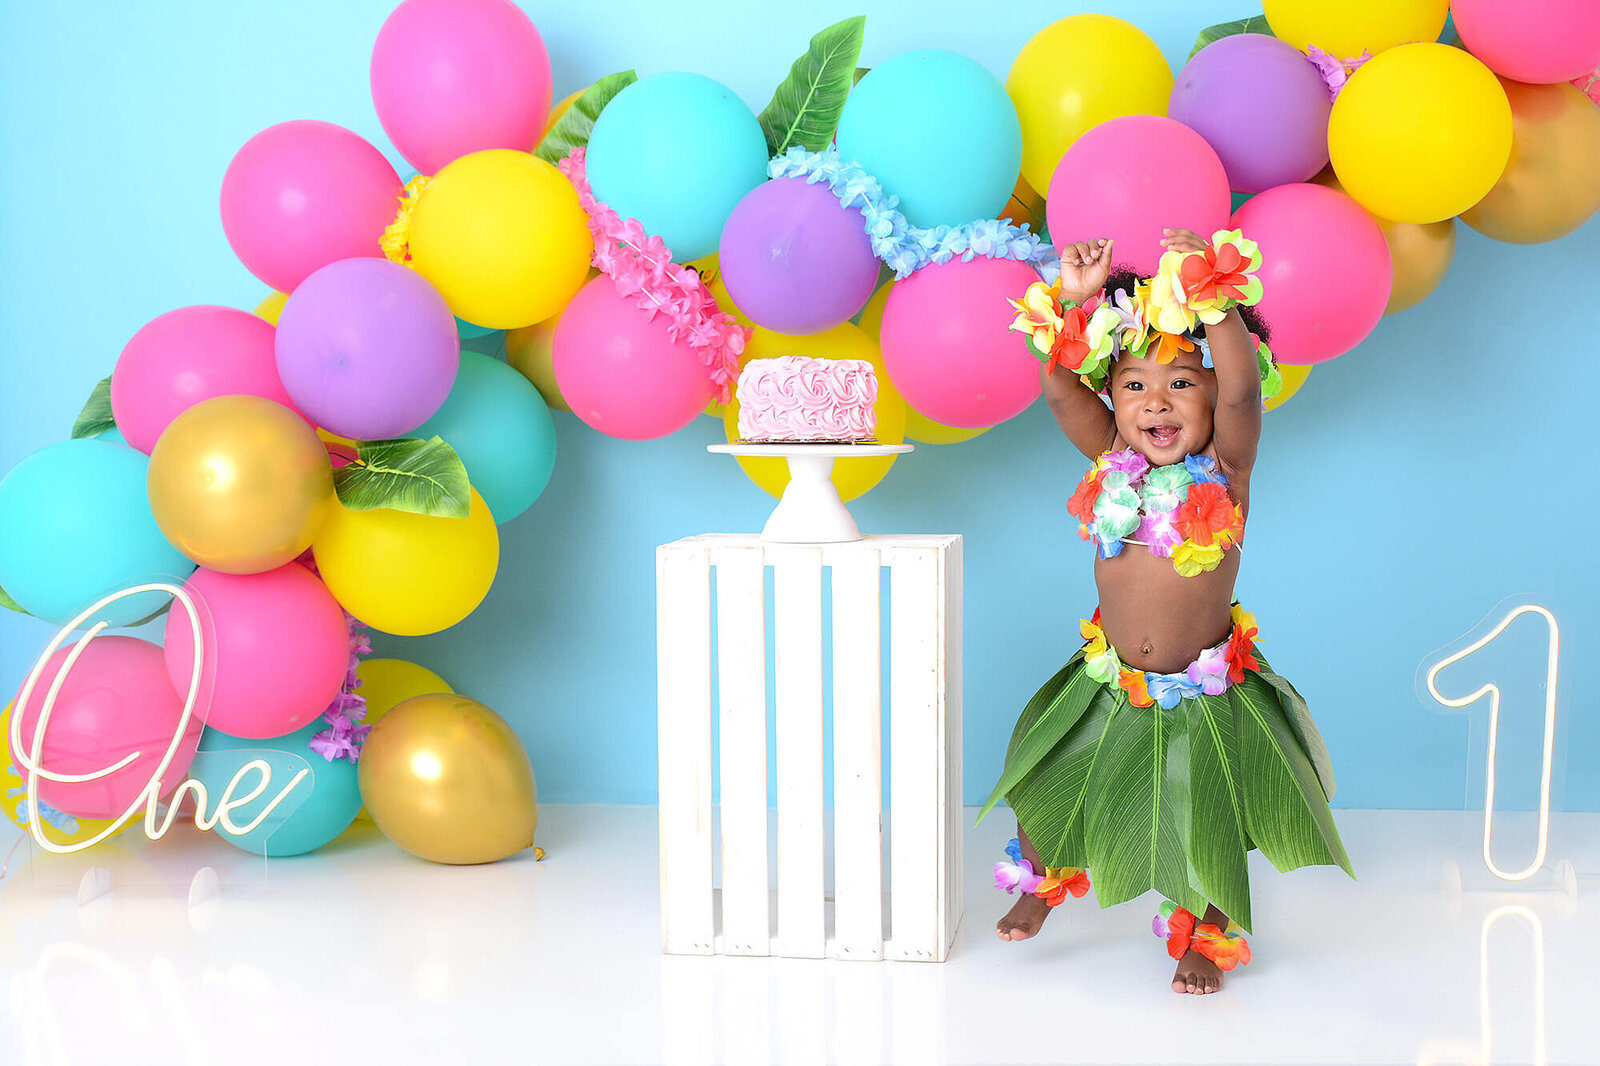 birthday girl wear a hawaiian outfit  and danced in front of a blue background with vibrant balloons